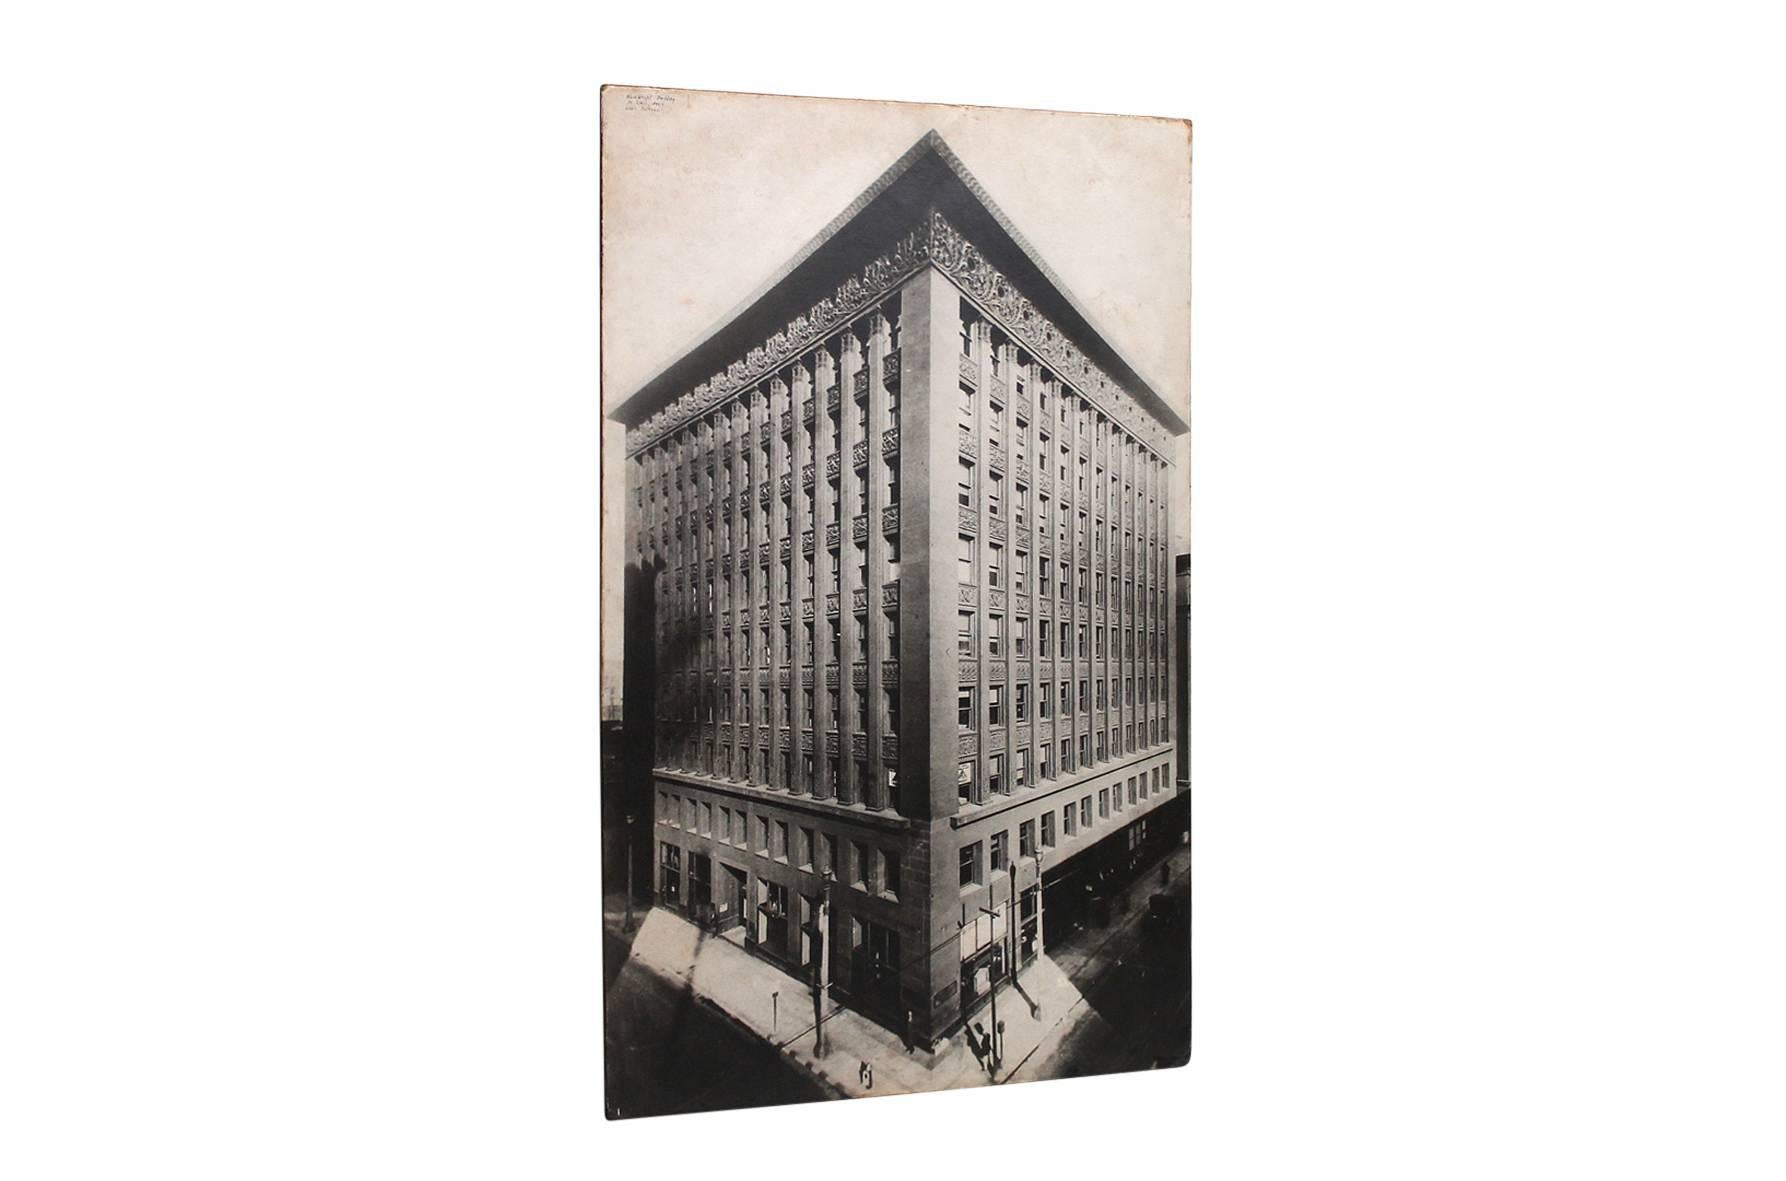 Large format MOMA exhibition photograph on board of the Wainwright building designed by Louis Sullivan in 1890. MOMA label from 11 West 53rd ST on reverse with a number and other details. This photograph was used in a well documented exhibition at